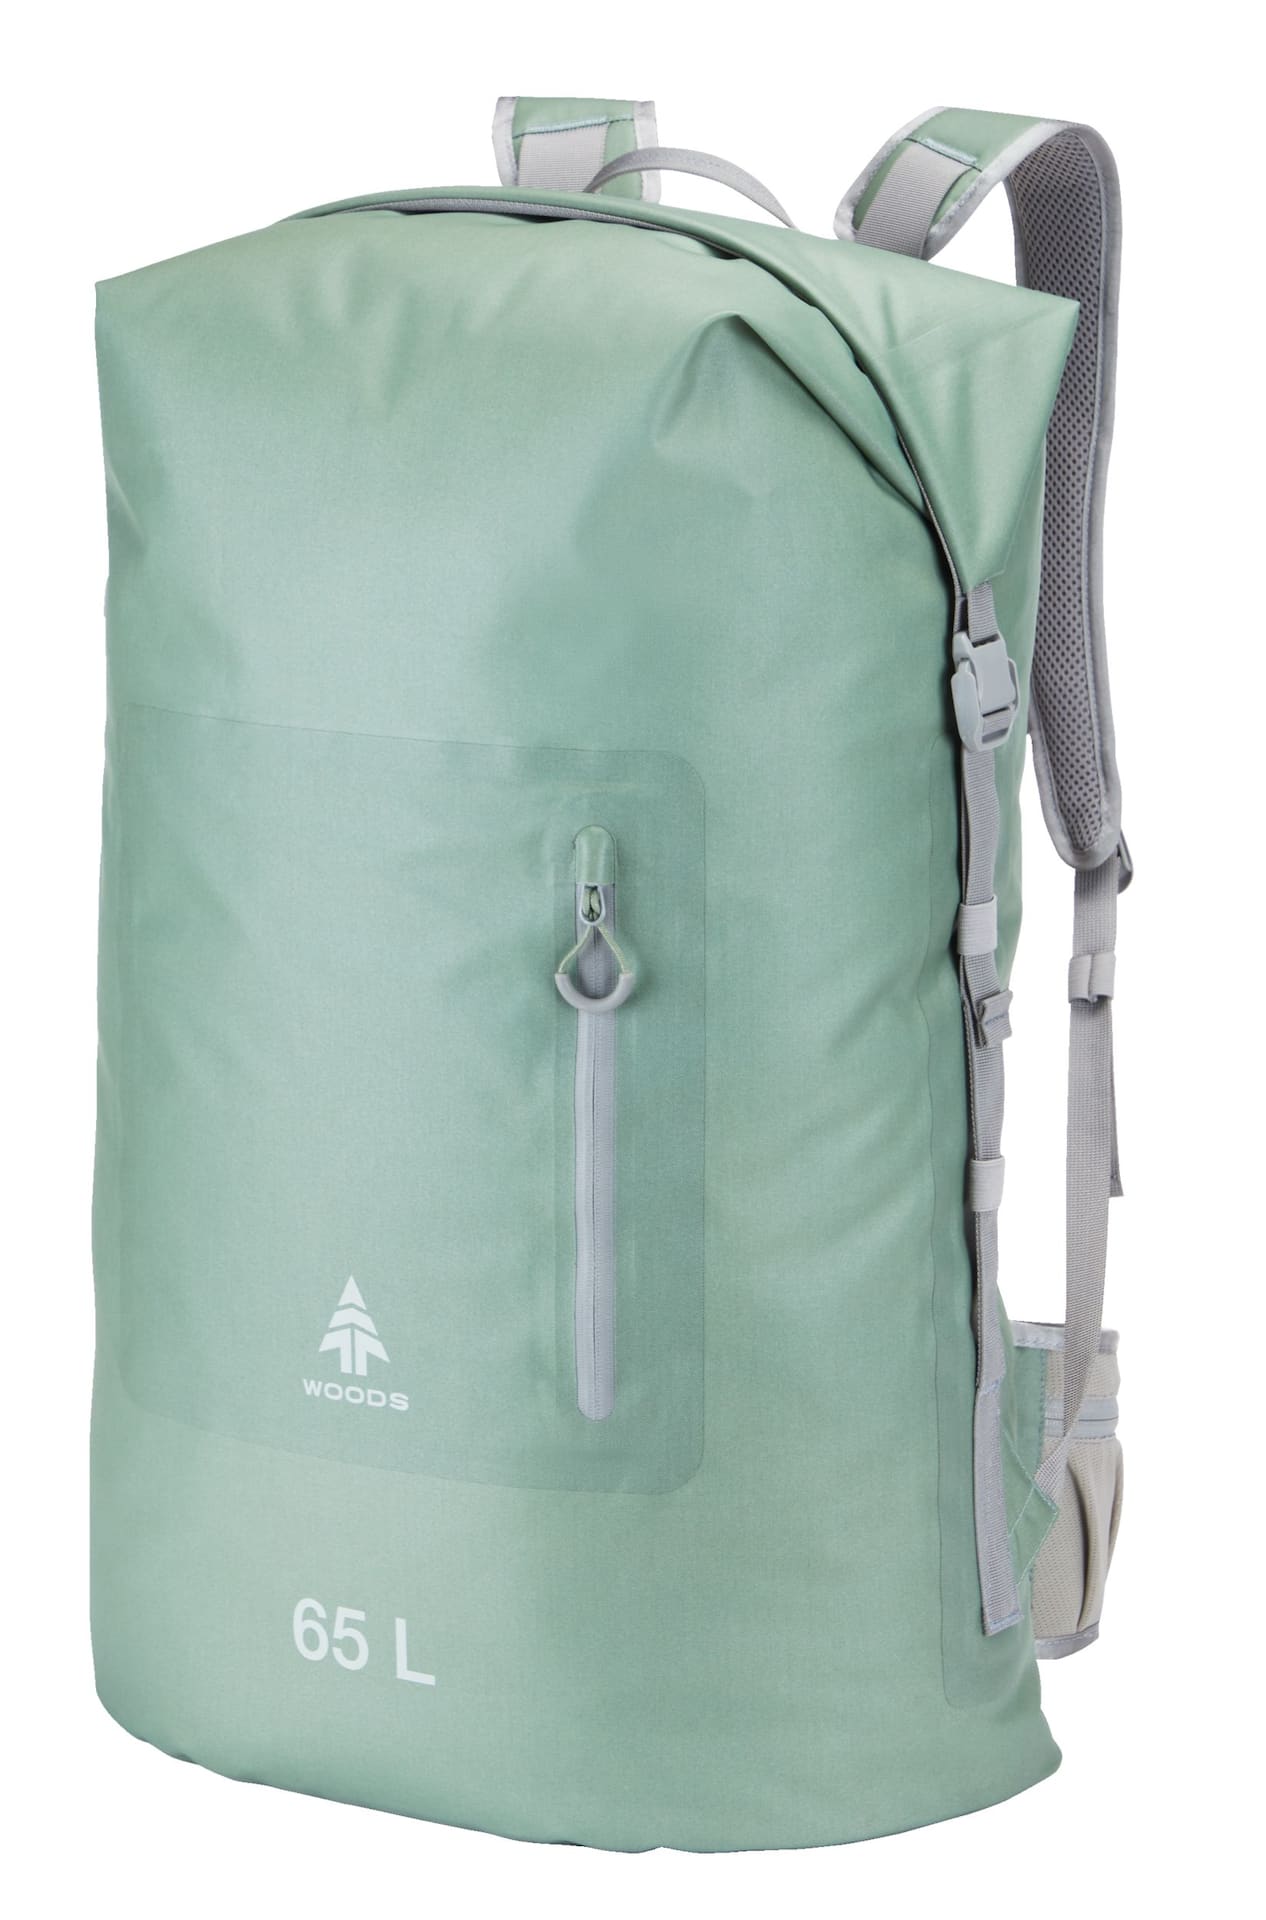 https://media-www.canadiantire.ca/product/playing/camping/backpacks-luggage-accessories/0763729/woods-portage-65-dry-pack-1f5210c8-84ac-43ea-ba0c-f8df2ddcb0a6-jpgrendition.jpg